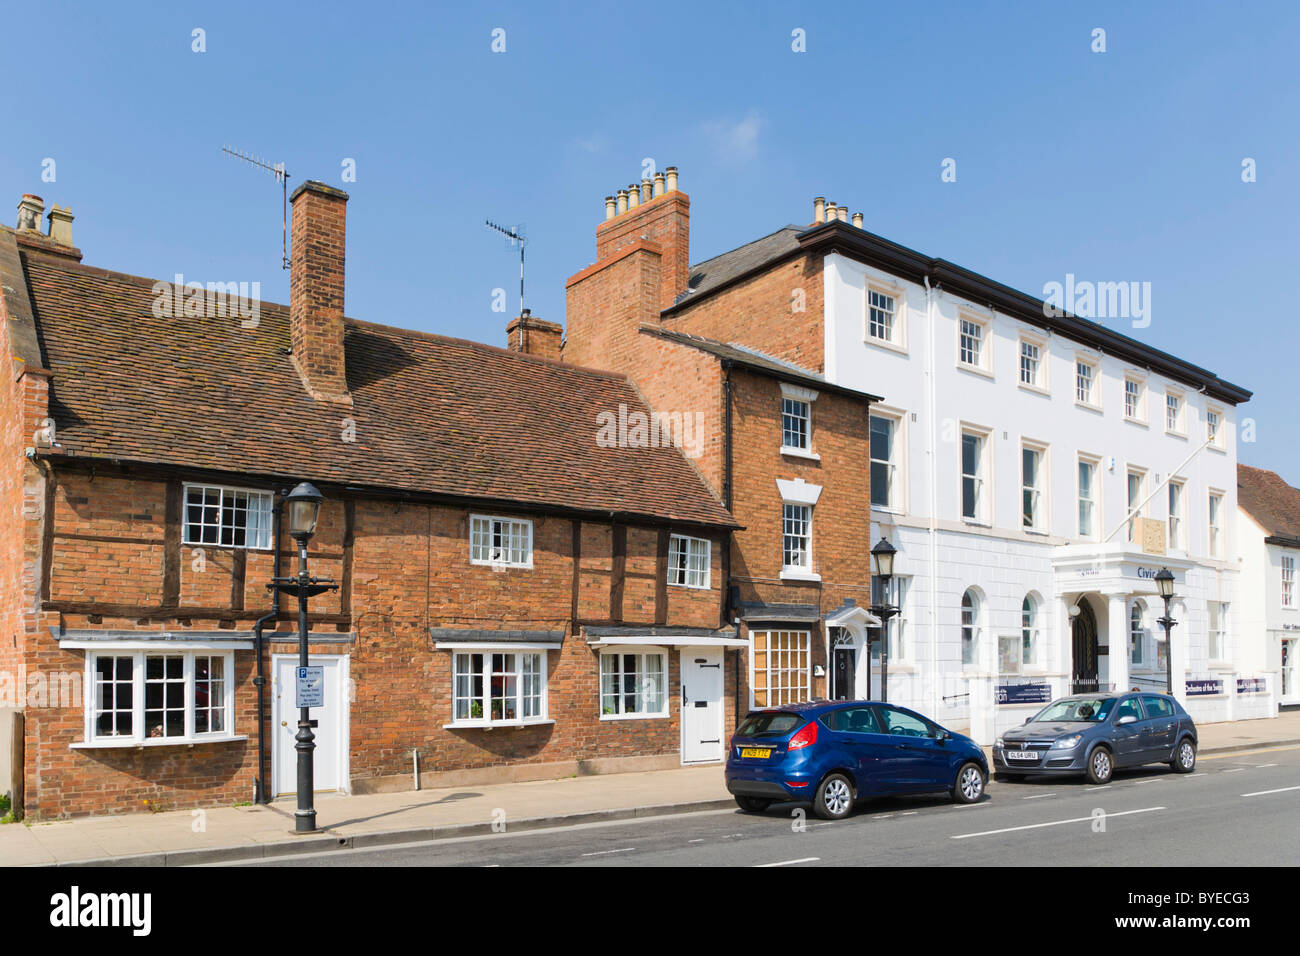 Rother Street, Stratford-upon-Avon, Warwickshire, Angleterre, Royaume-Uni, Europe Banque D'Images